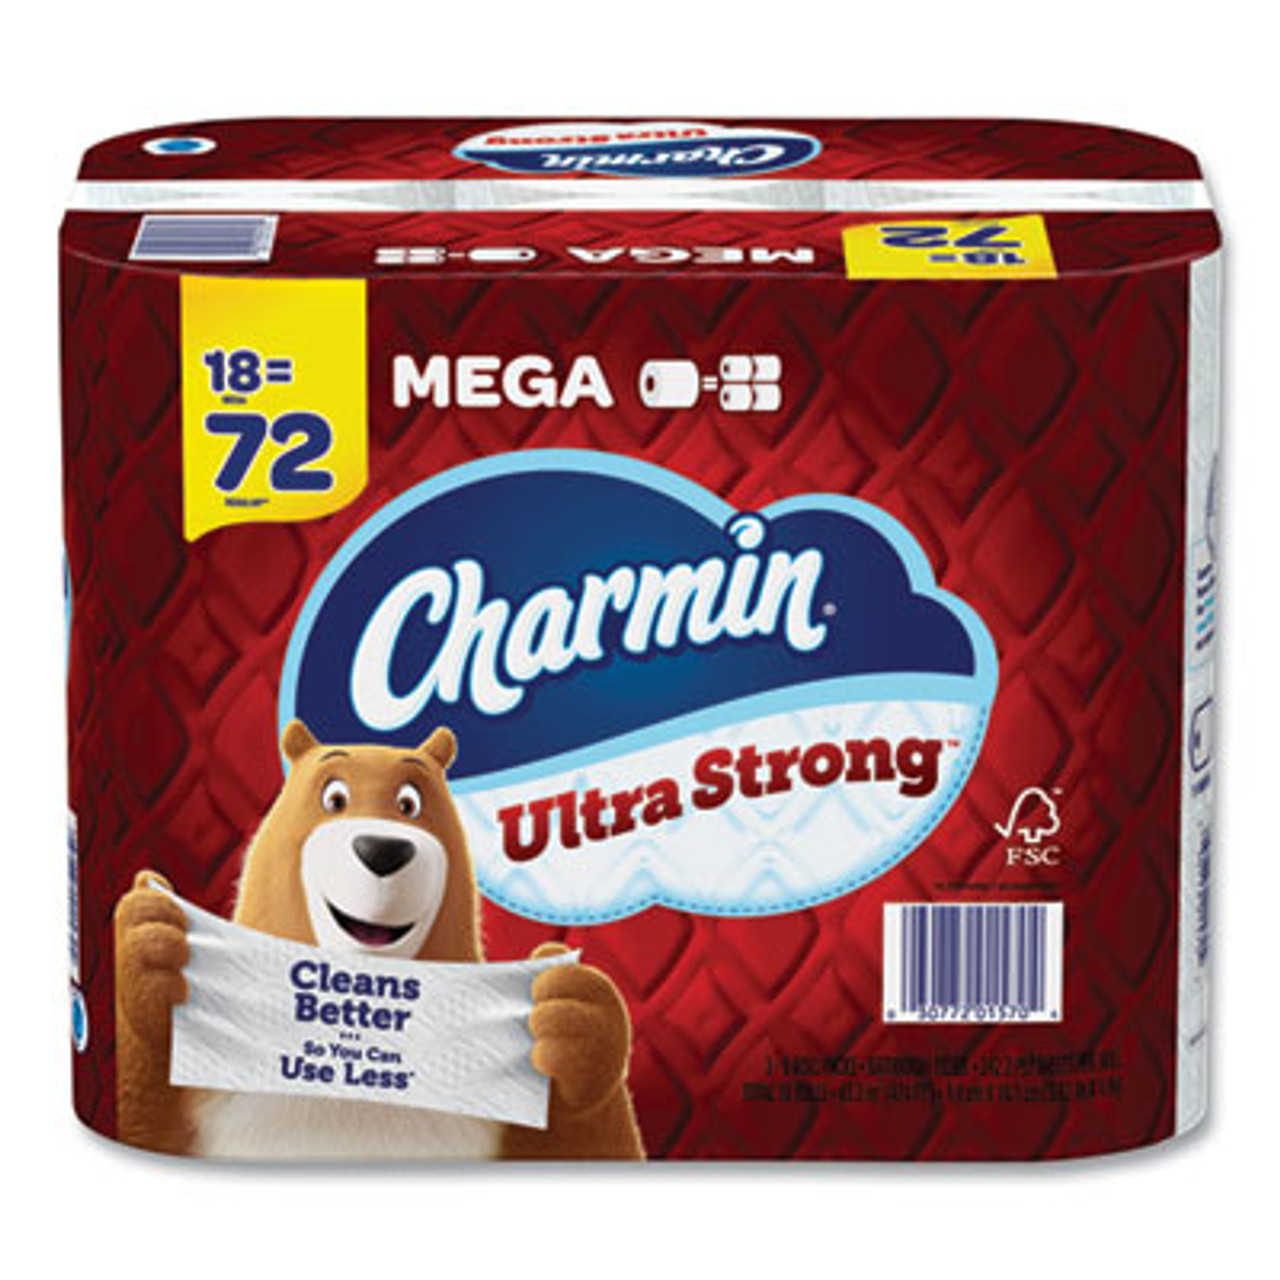 Charmin Ultra Strong Toilet Paper 18/pack